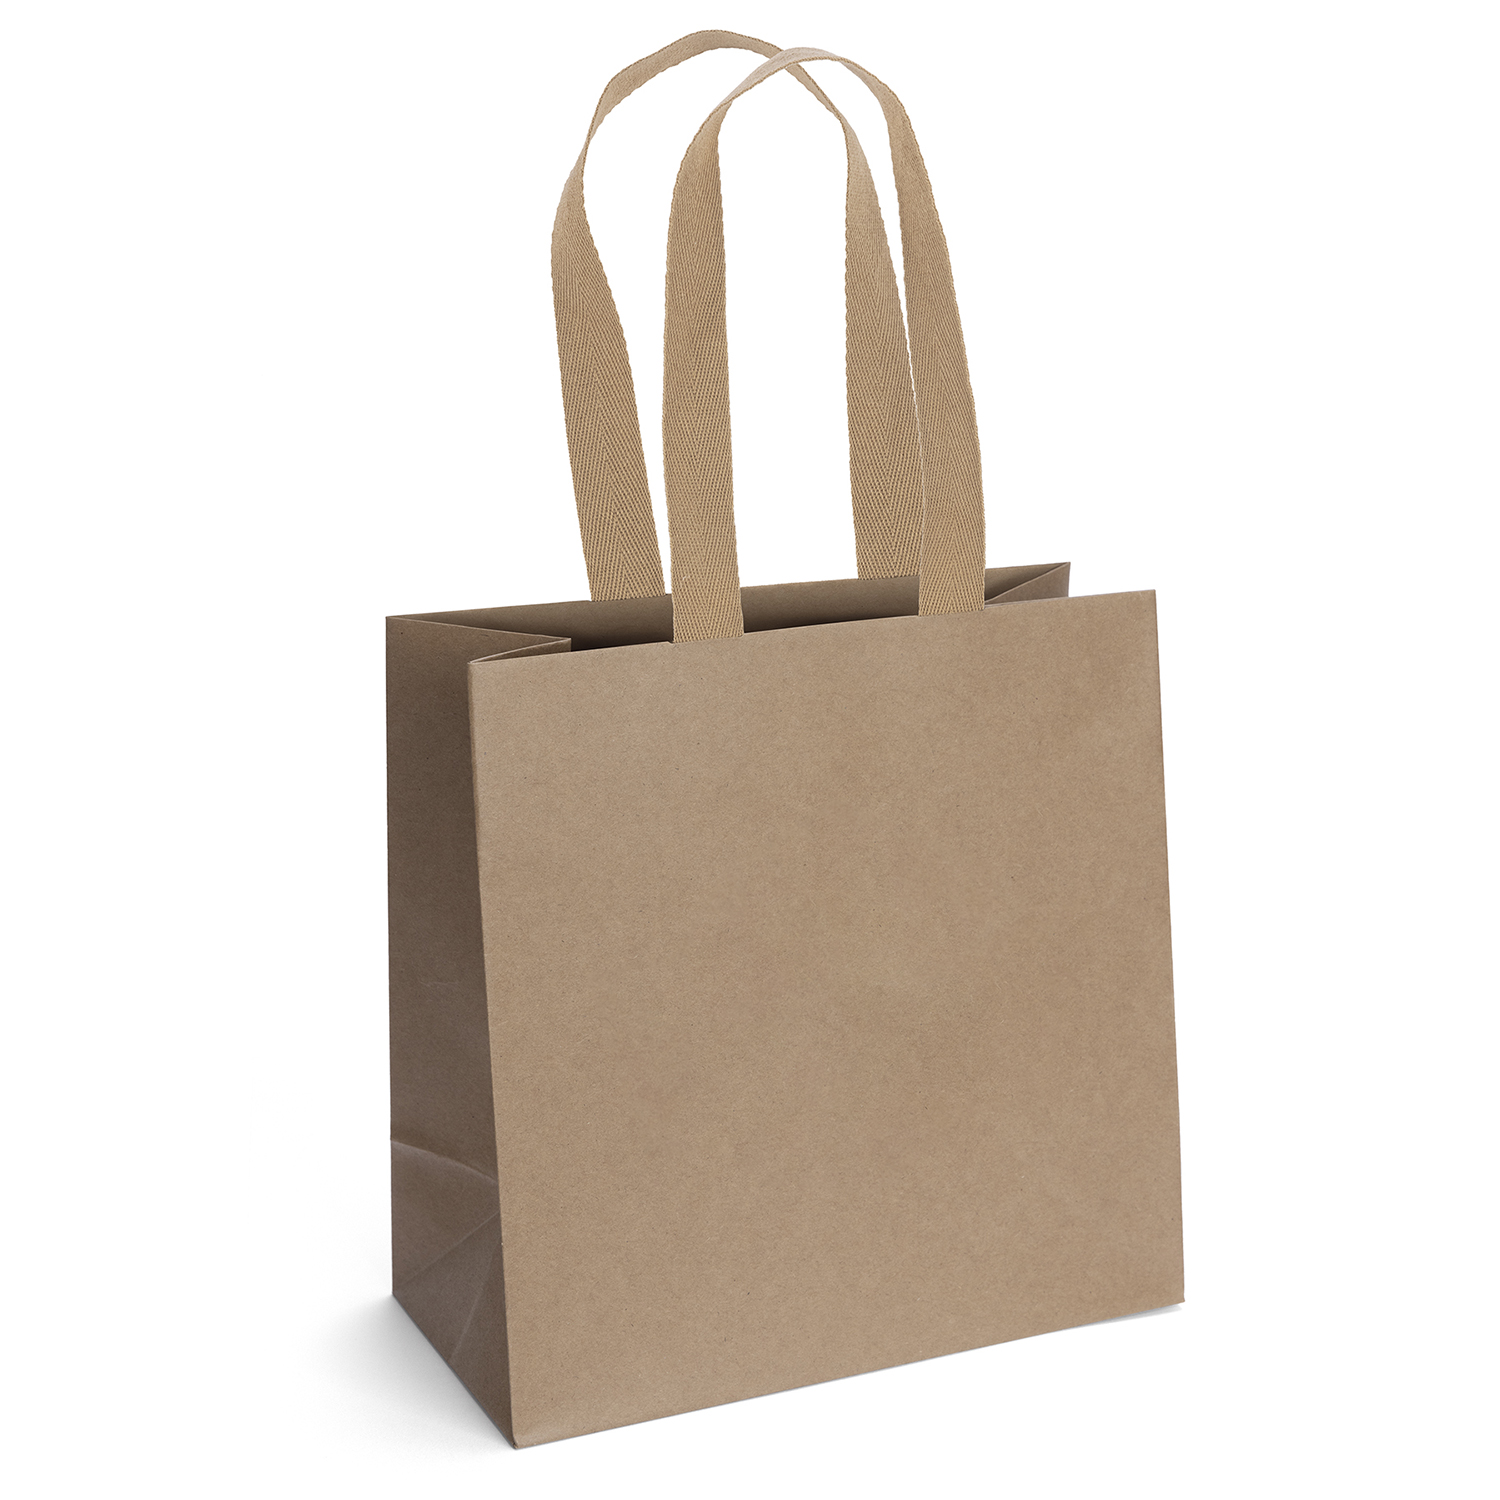 Bag Makers DYECOL1010 - Custom Printed Eco-Friendly Promotional Paper Bag